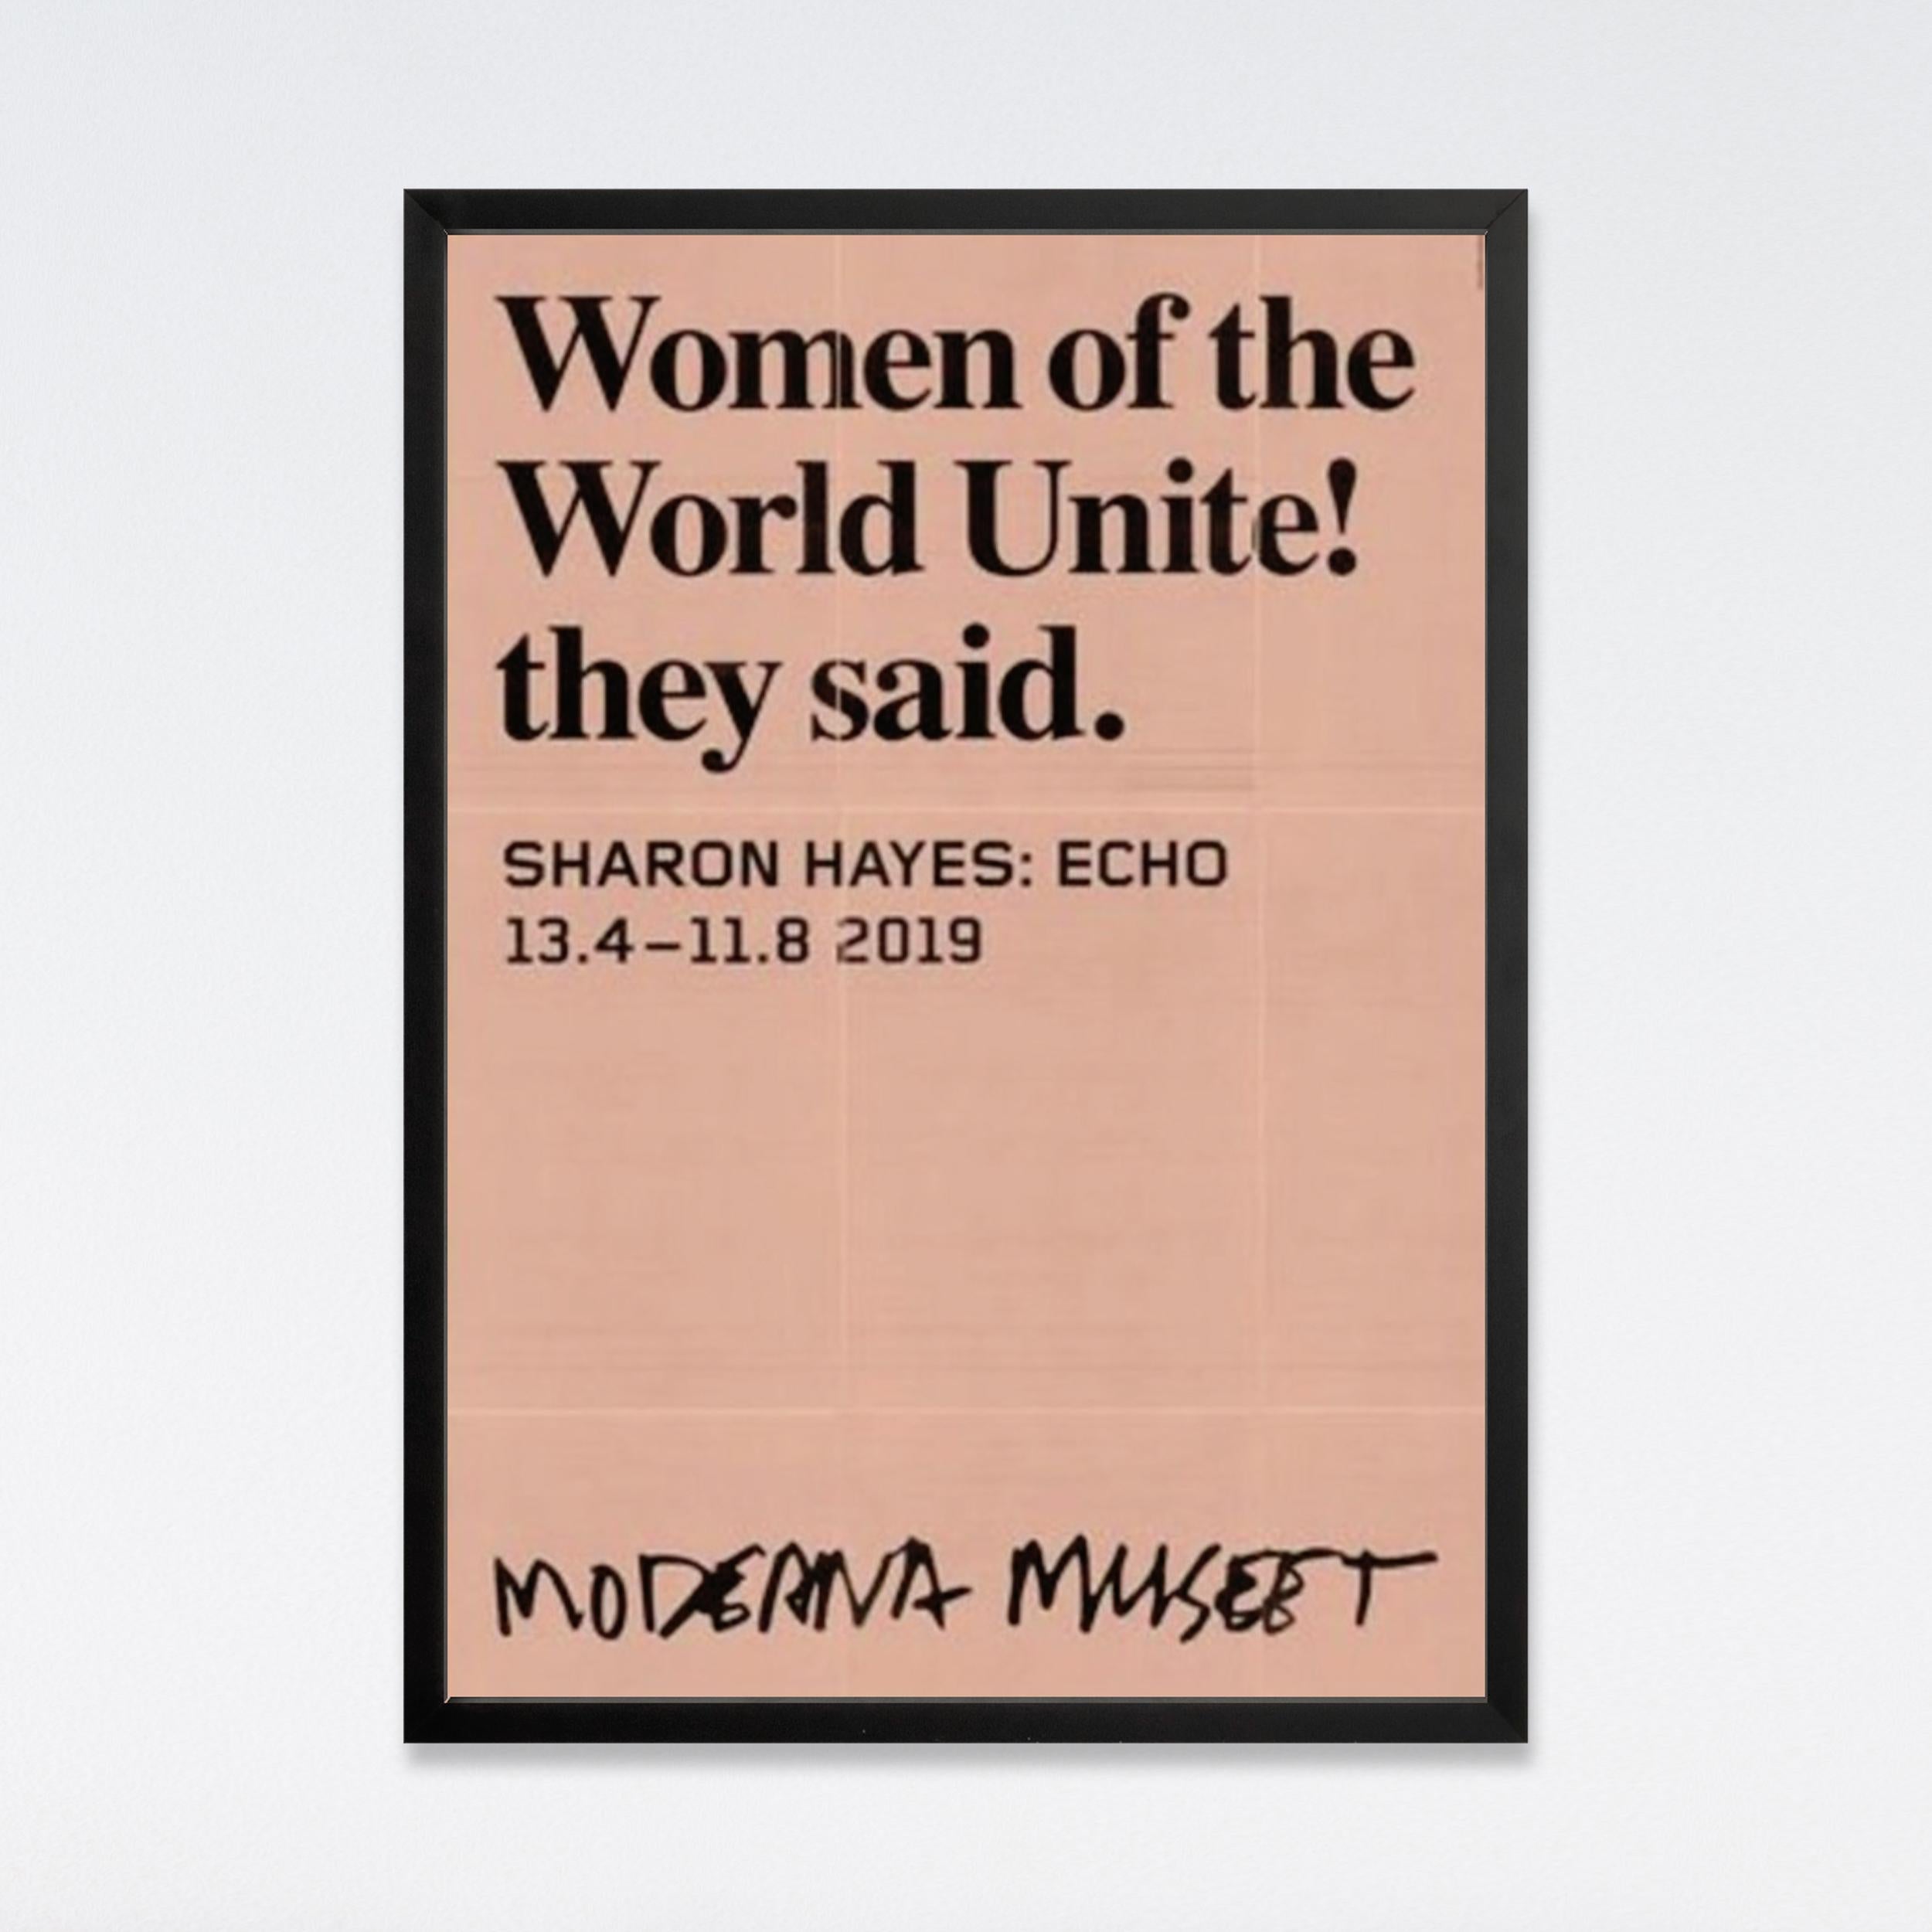 Exhibition poster from Moderna Museet, Stockholm.

19.68 x 27.55 in
50 x 70 cm

From street protest to art spaces – Sharon Hayes highlights activism on the art scene, and is currently a seminal voice in American contemporary political art. The 2019